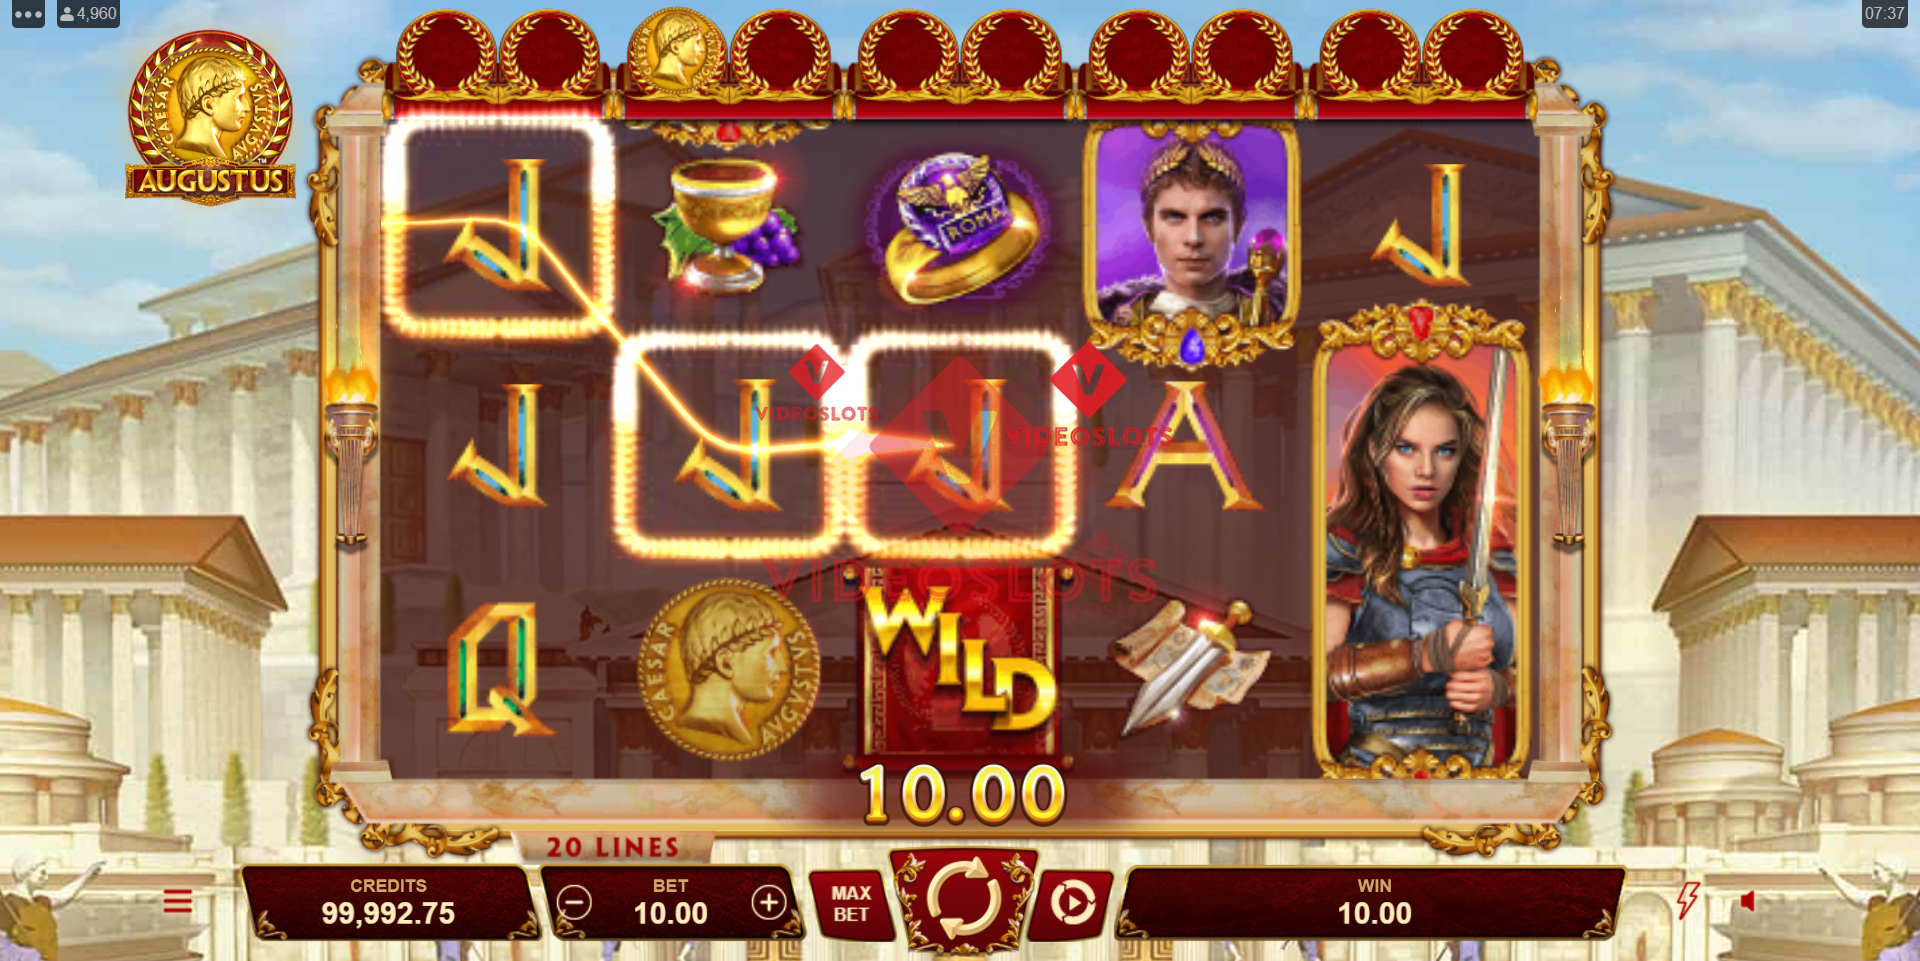 Base Game for Augustus slot for Microgaming